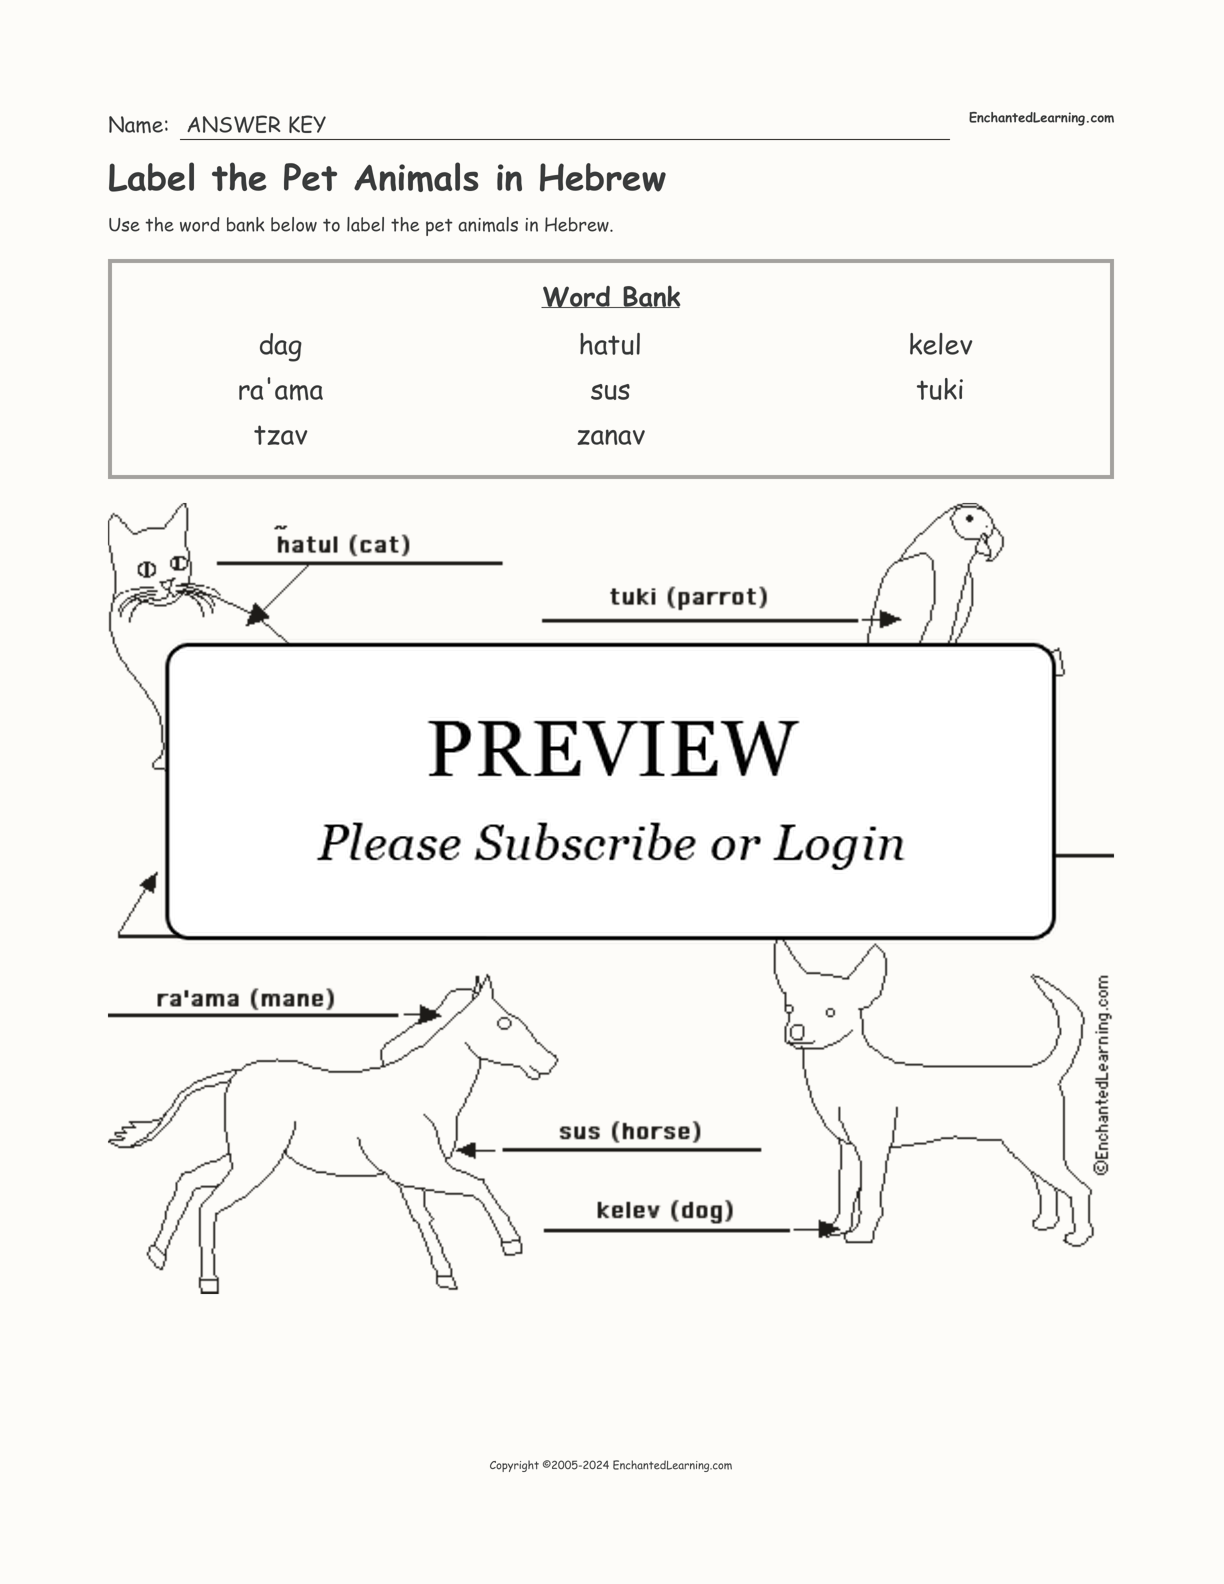 Label the Pet Animals in Hebrew interactive worksheet page 2